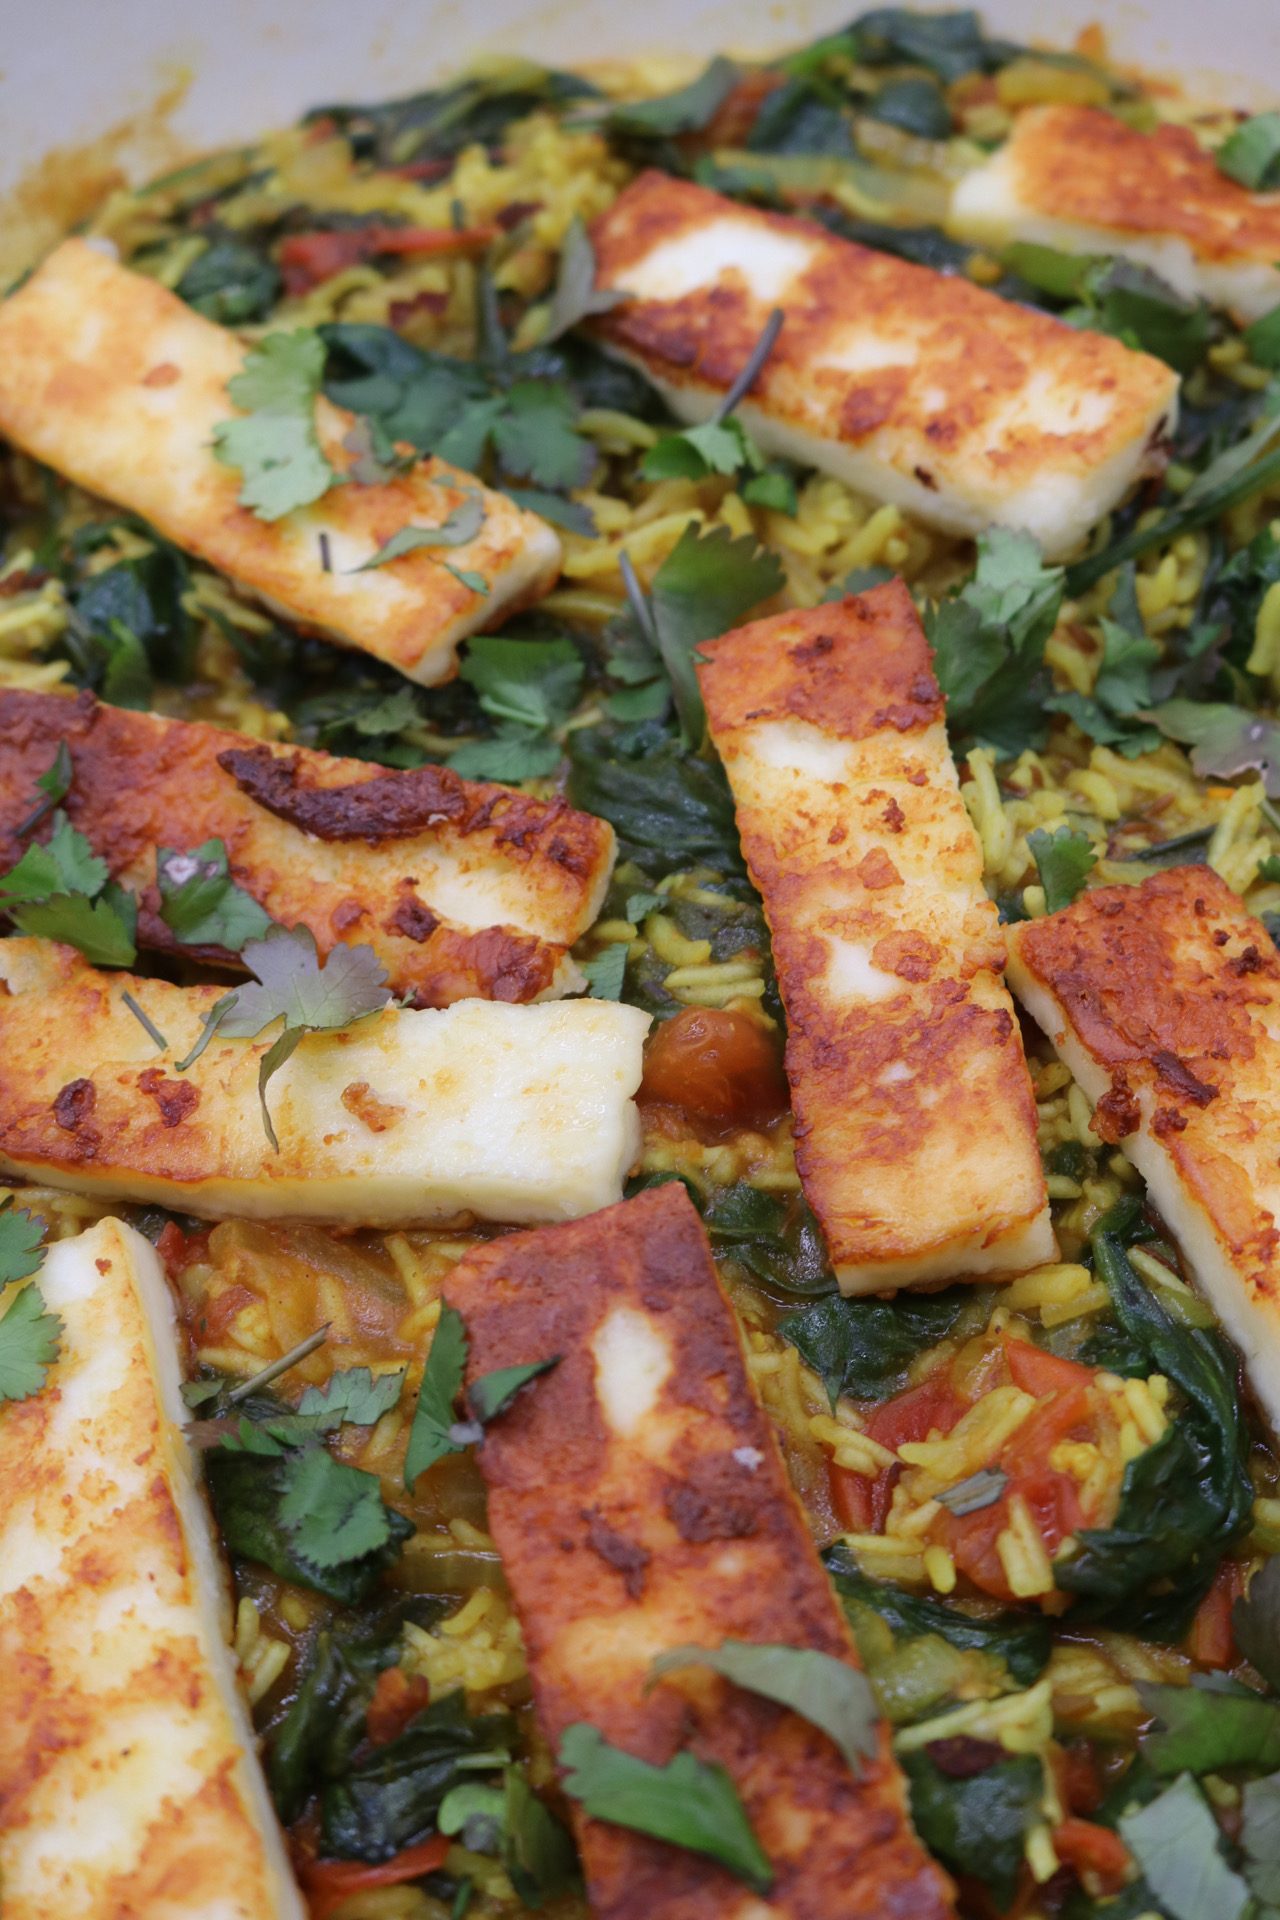 Spinach and Paneer Pilaf, Spinach and Paneer Pilaf